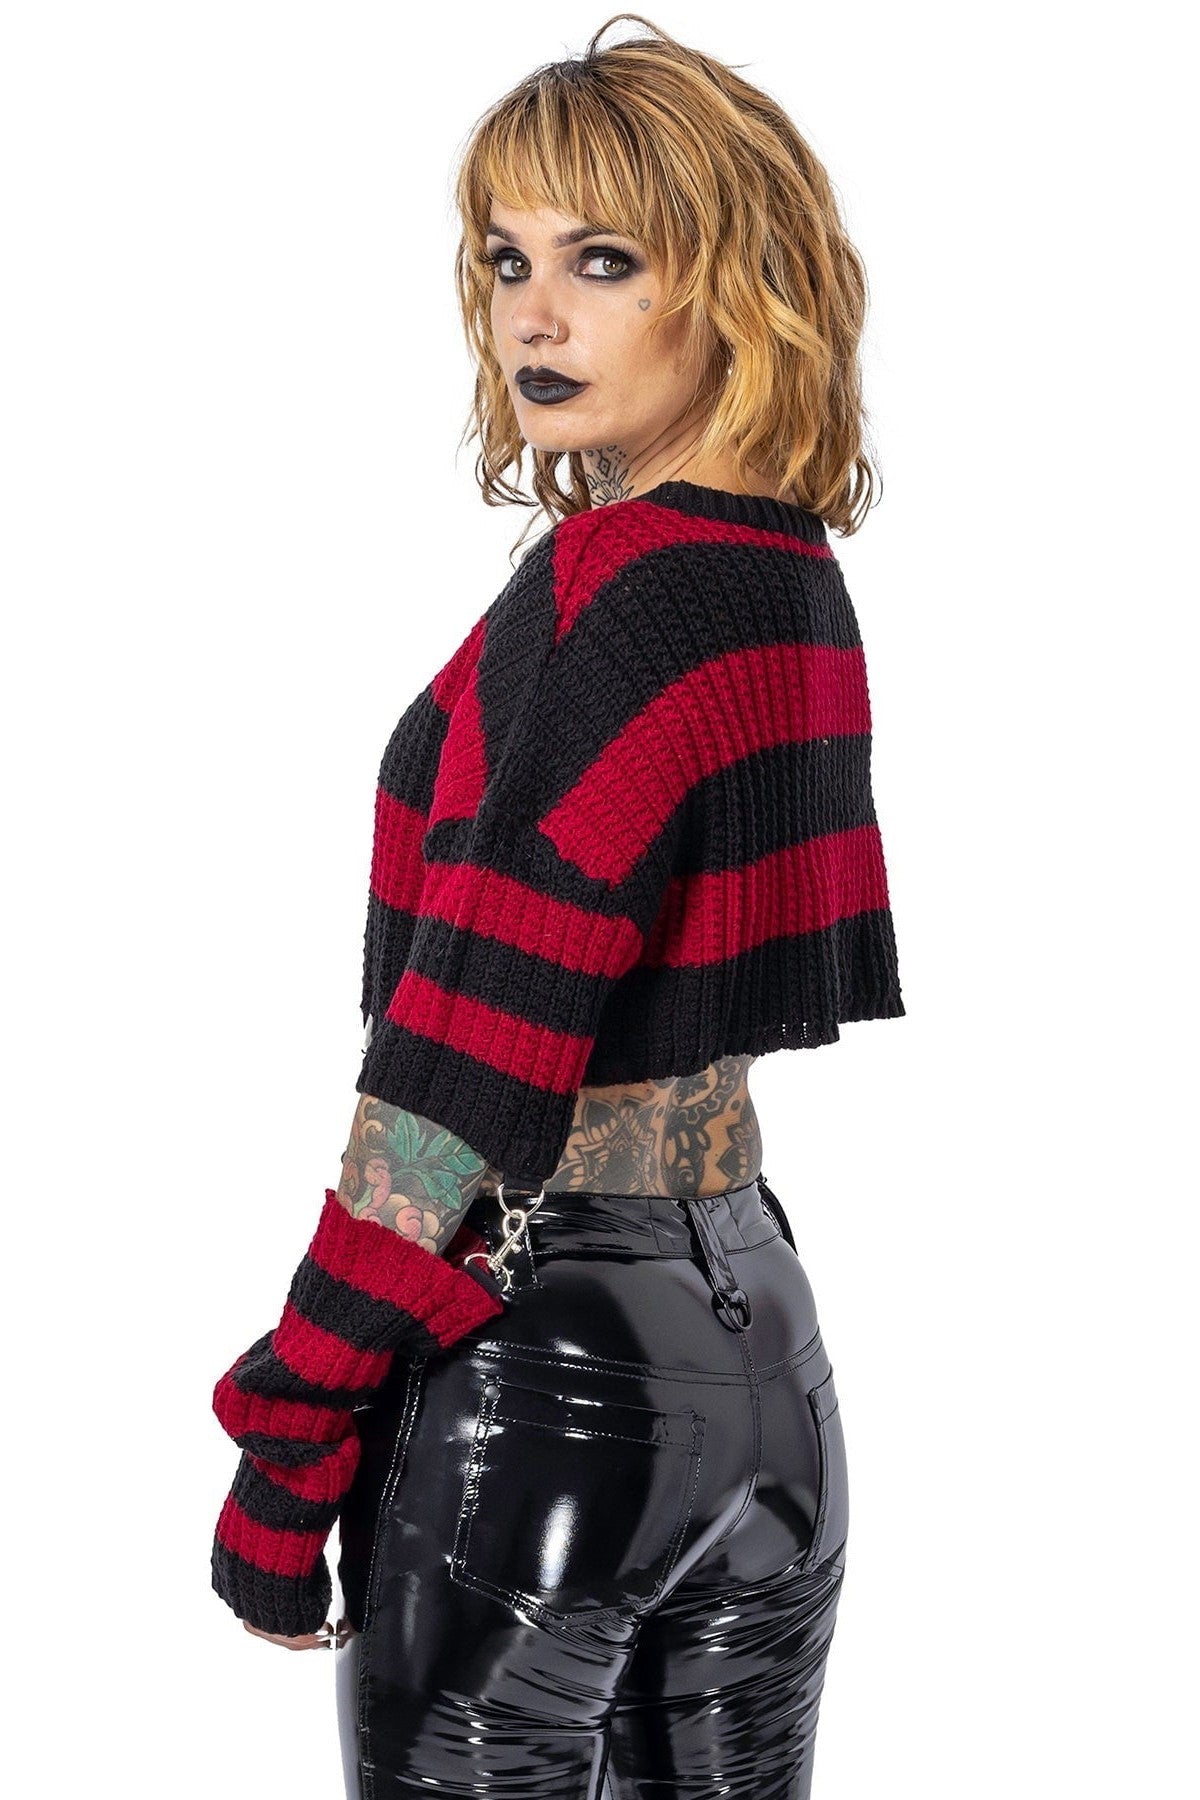 Heartless Isadora Striped Gothic Jumper with Detachable Sleeves